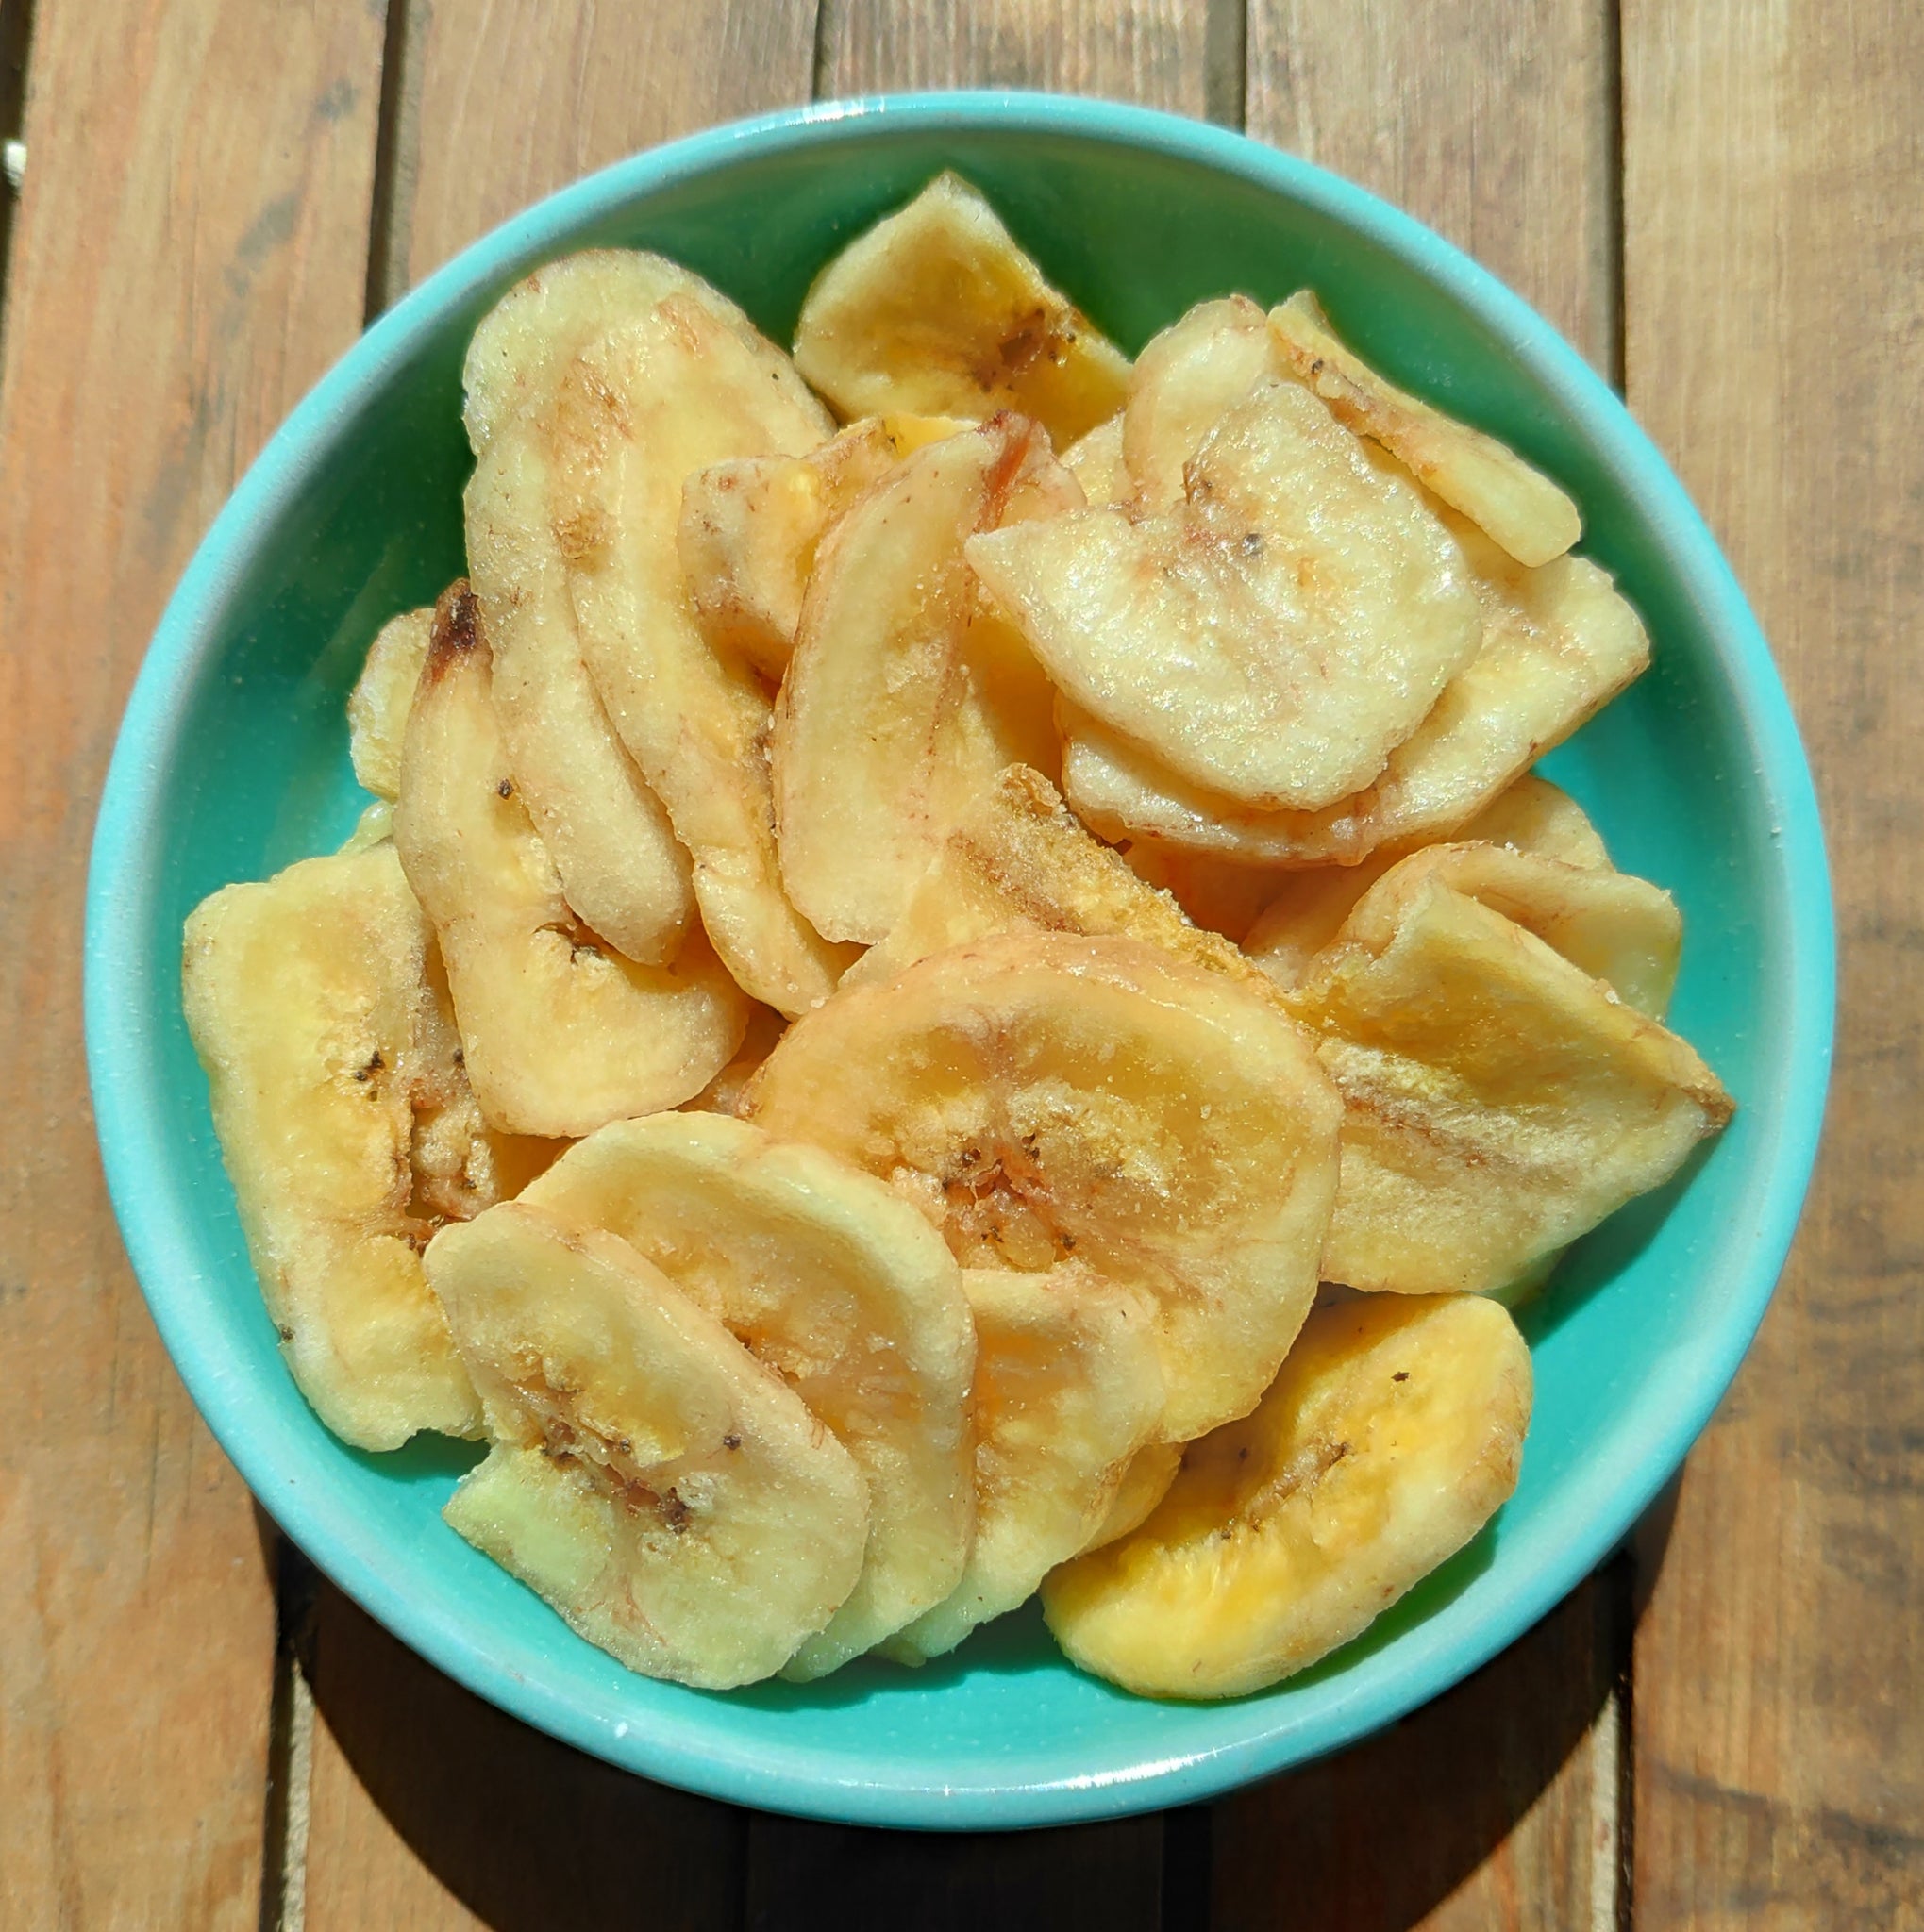 Banana Candied Slices